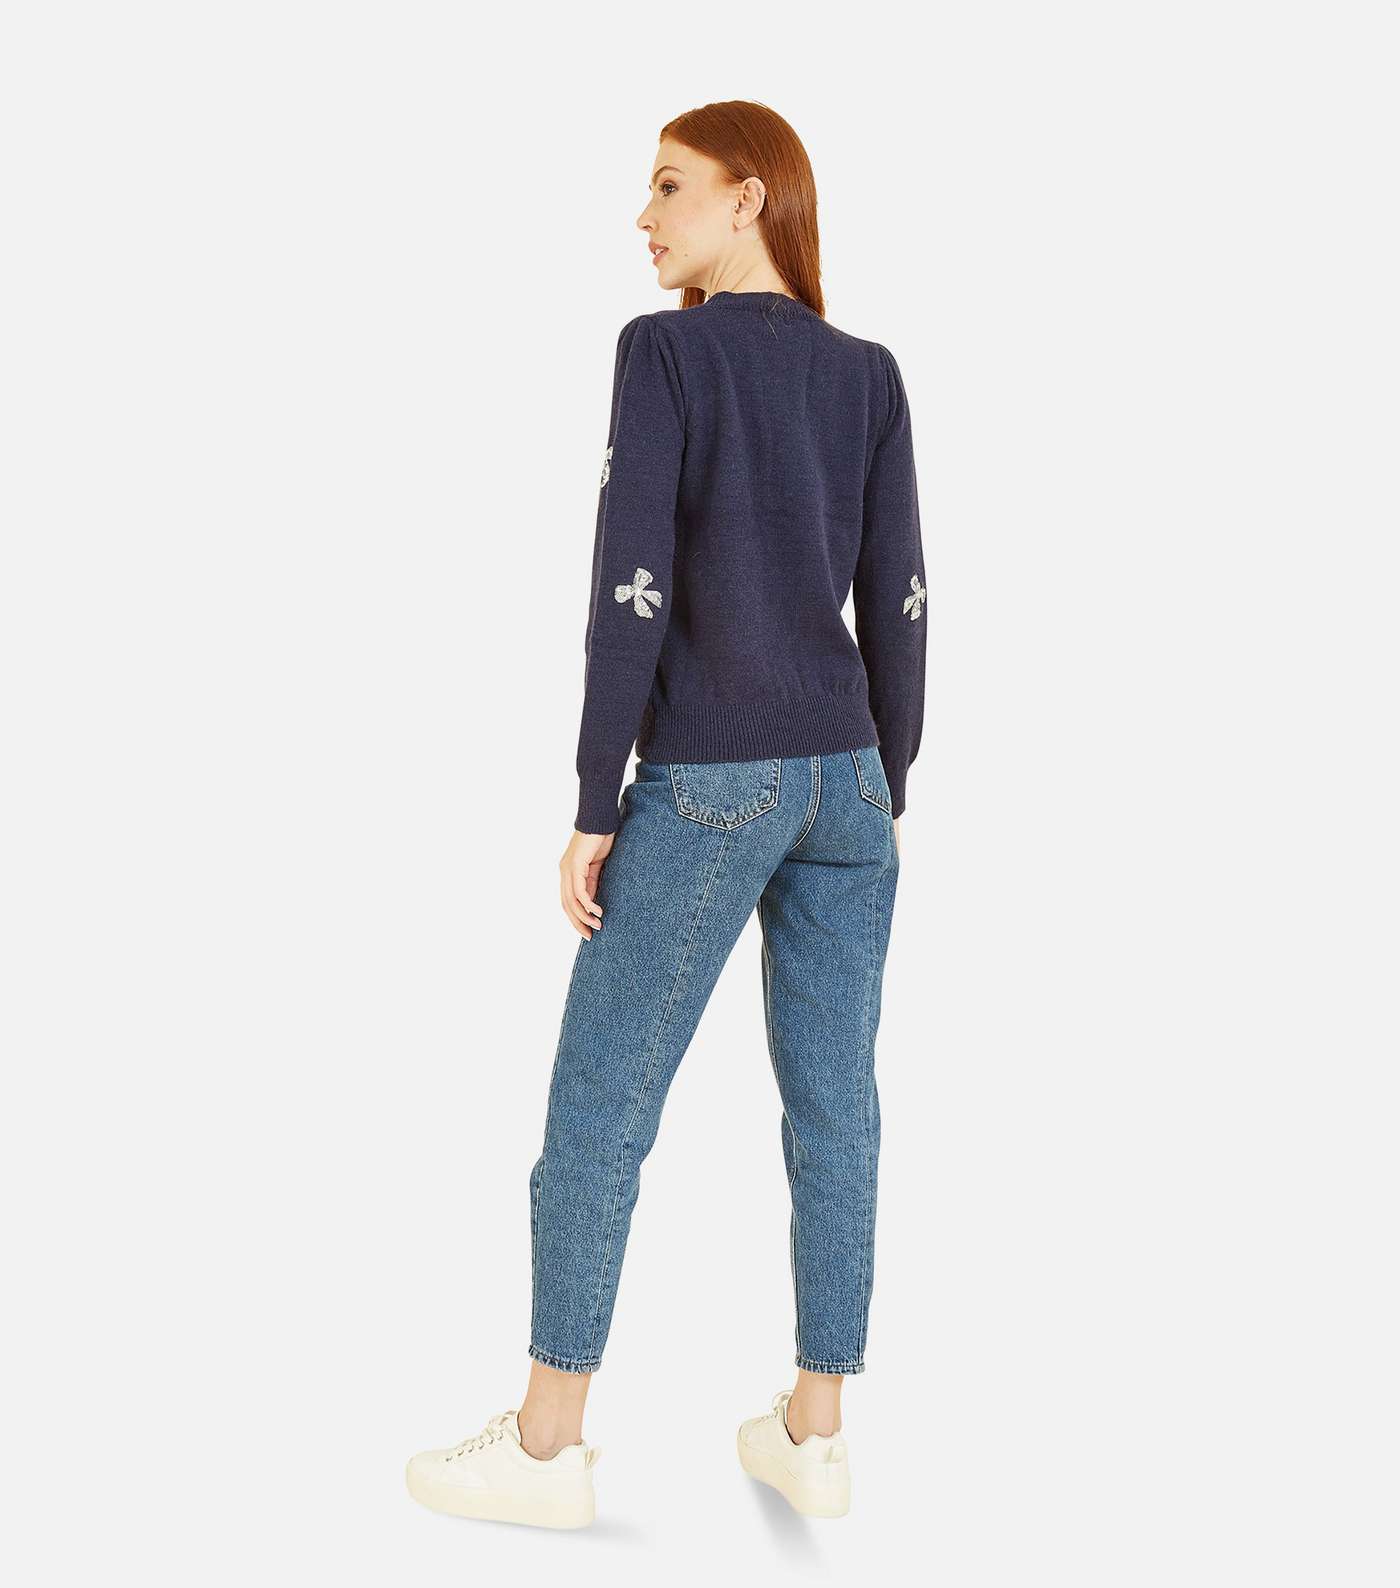 Yumi Navy Knit Sequin Embellished Bow Jumper Image 5